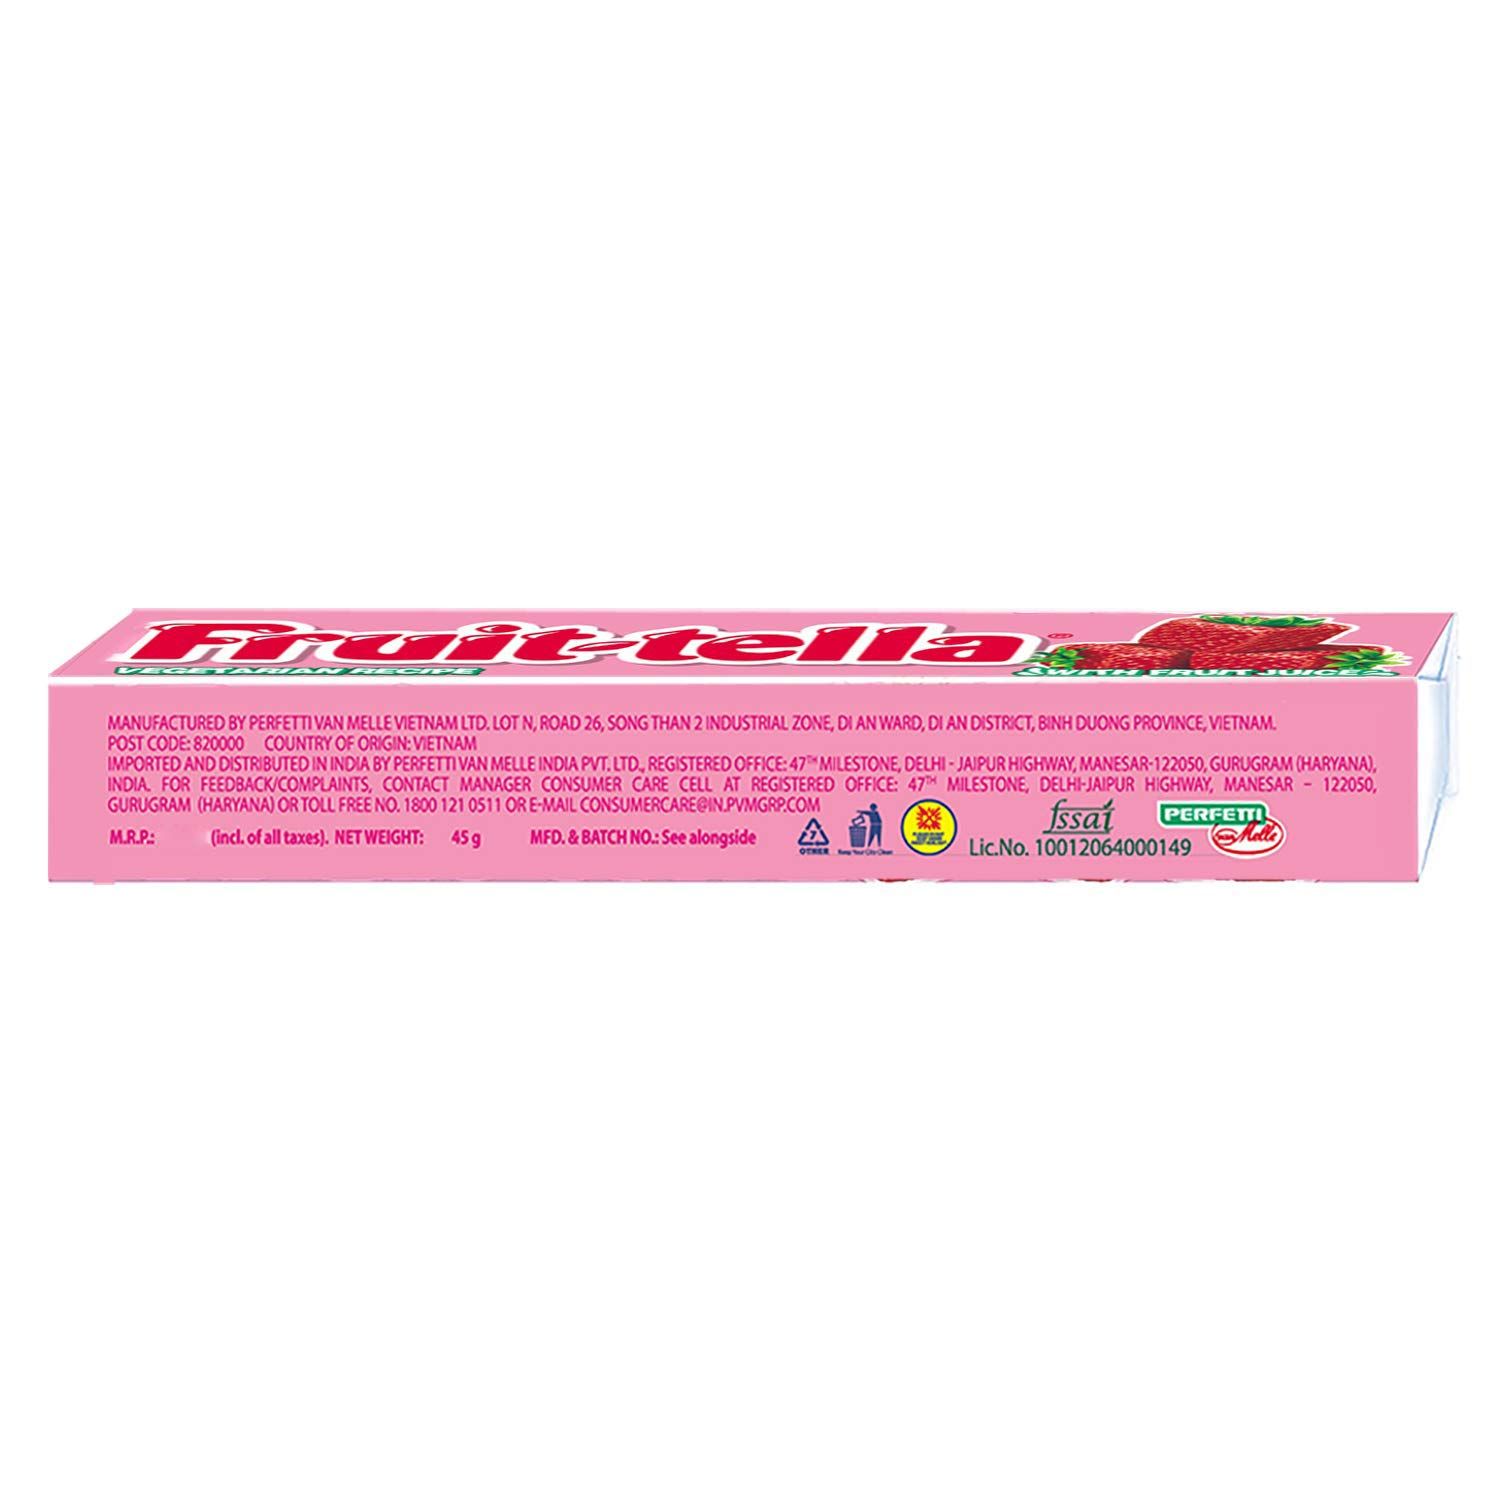 Fruittella Chewy Toffee Stick Strawberry Image